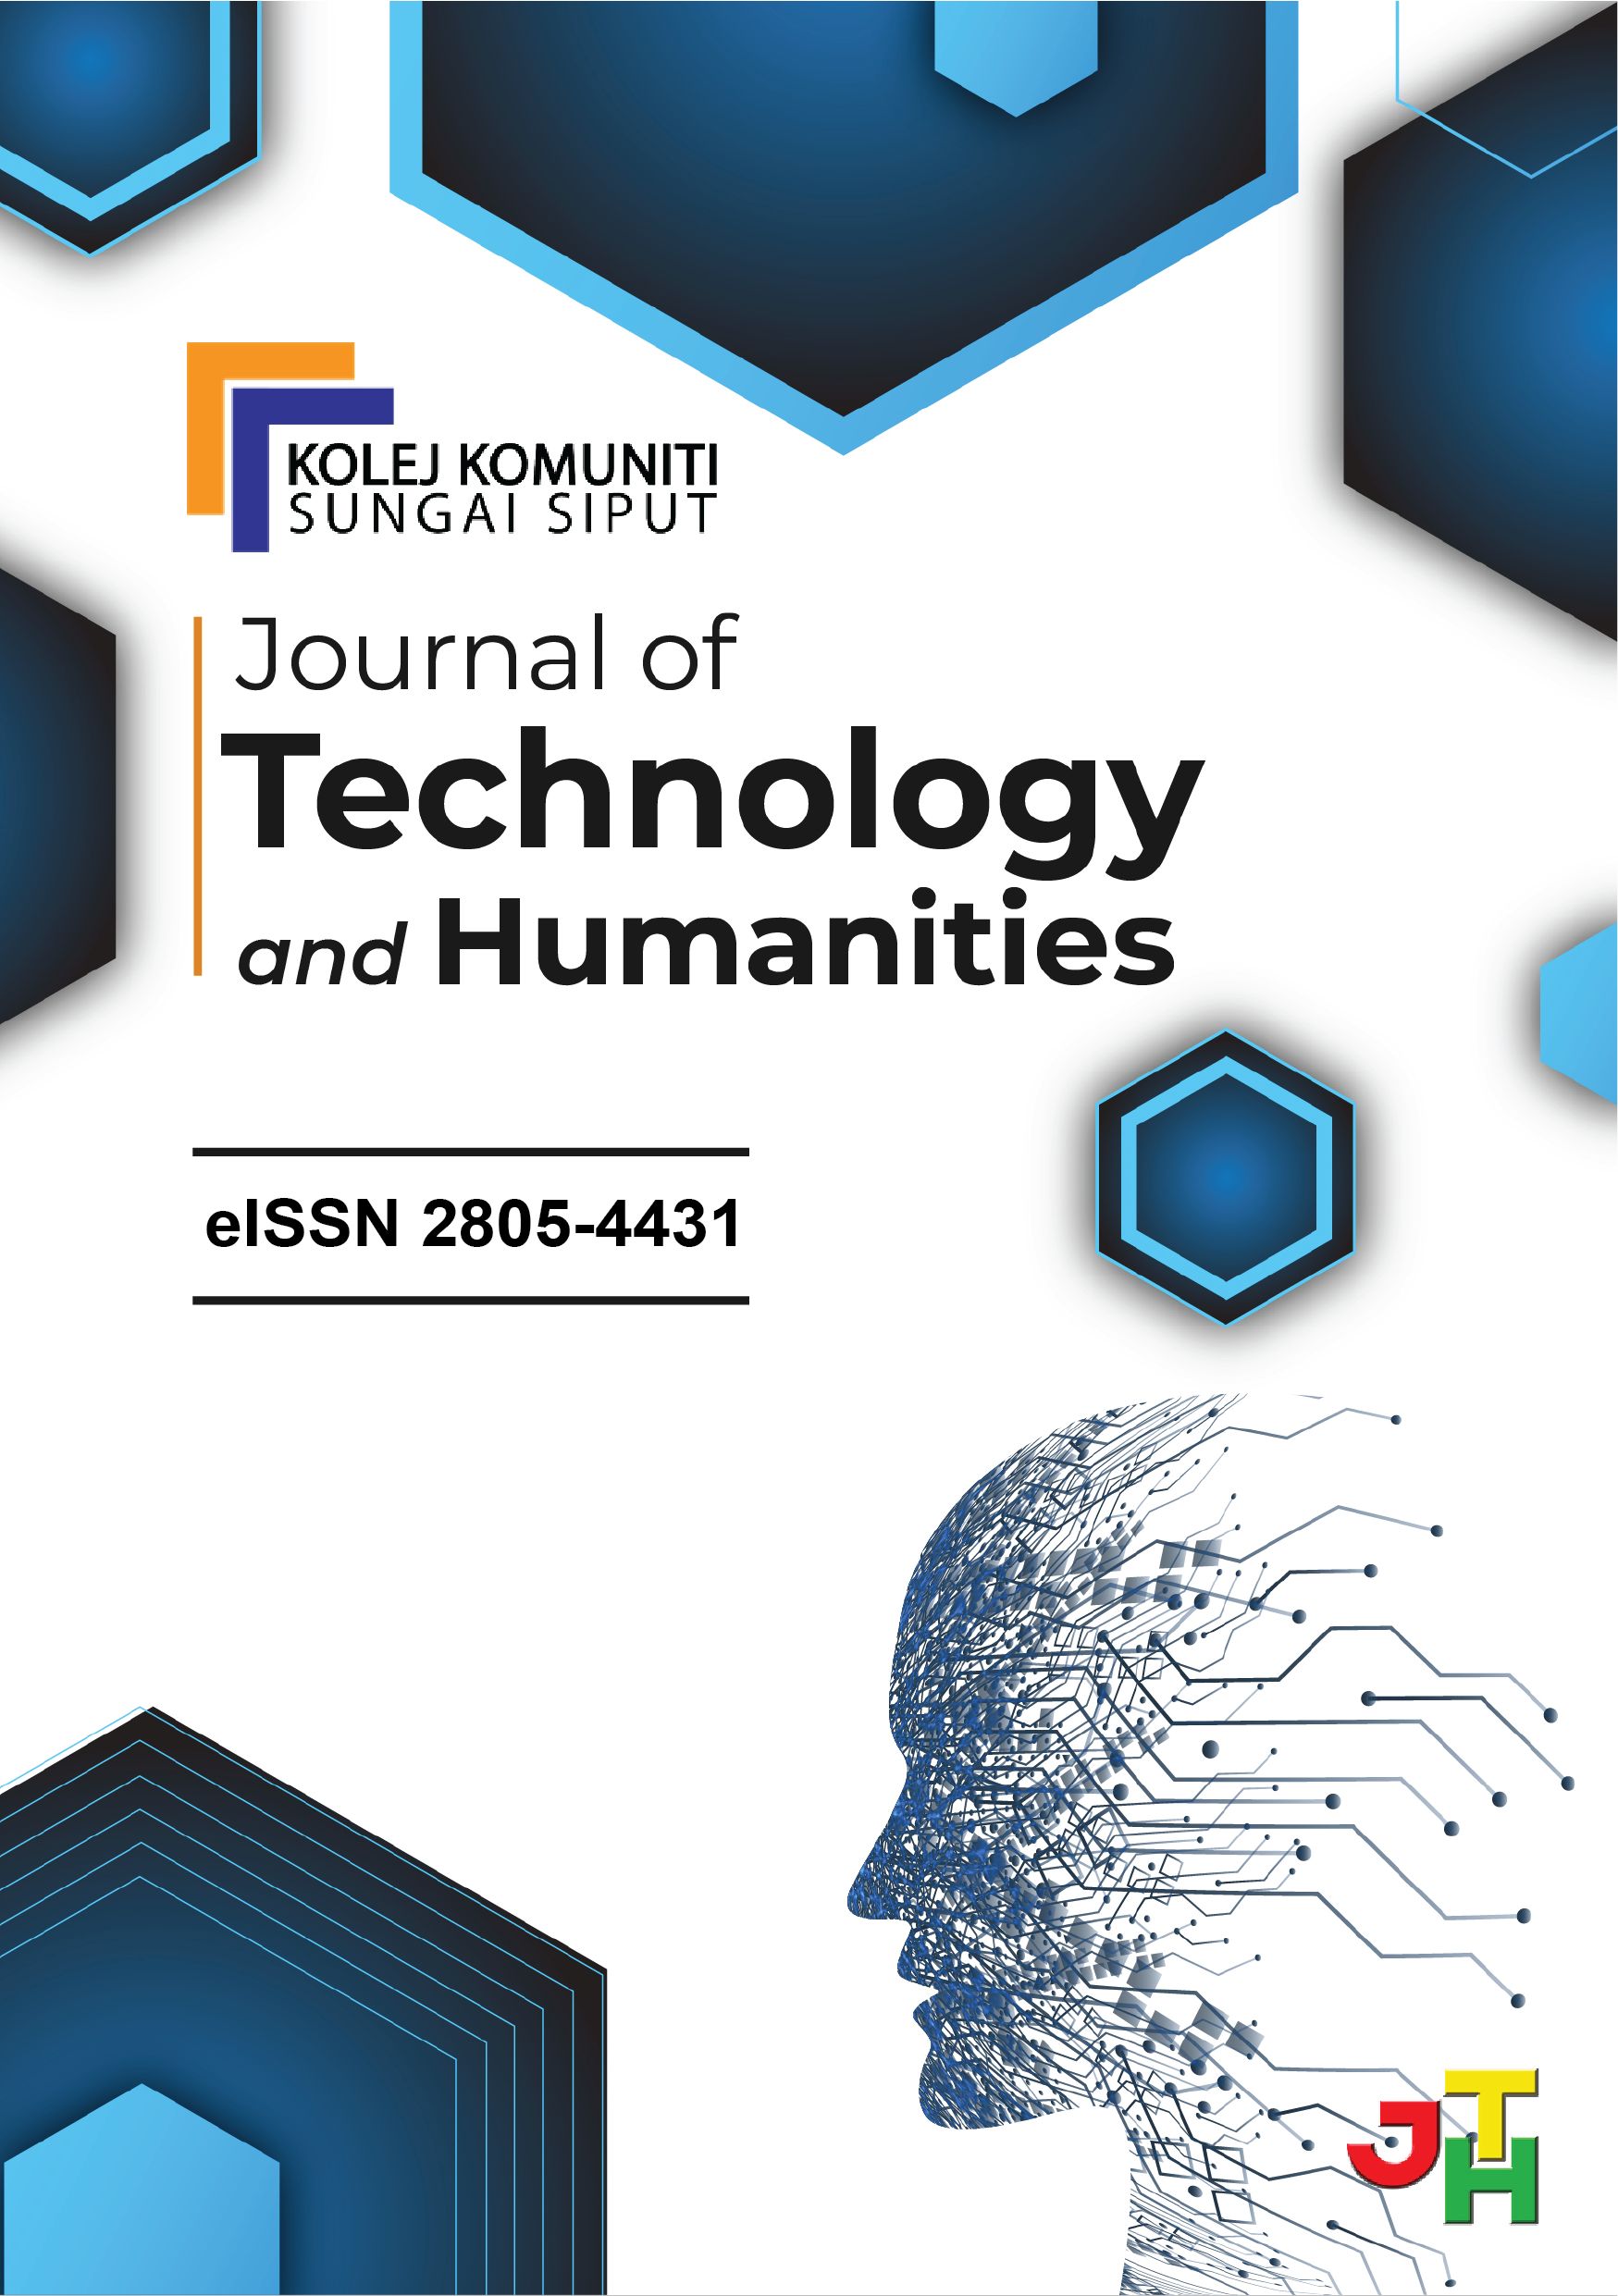 					View Vol. 2 No. 2 (2021): Journal of Technology and Humanities
				